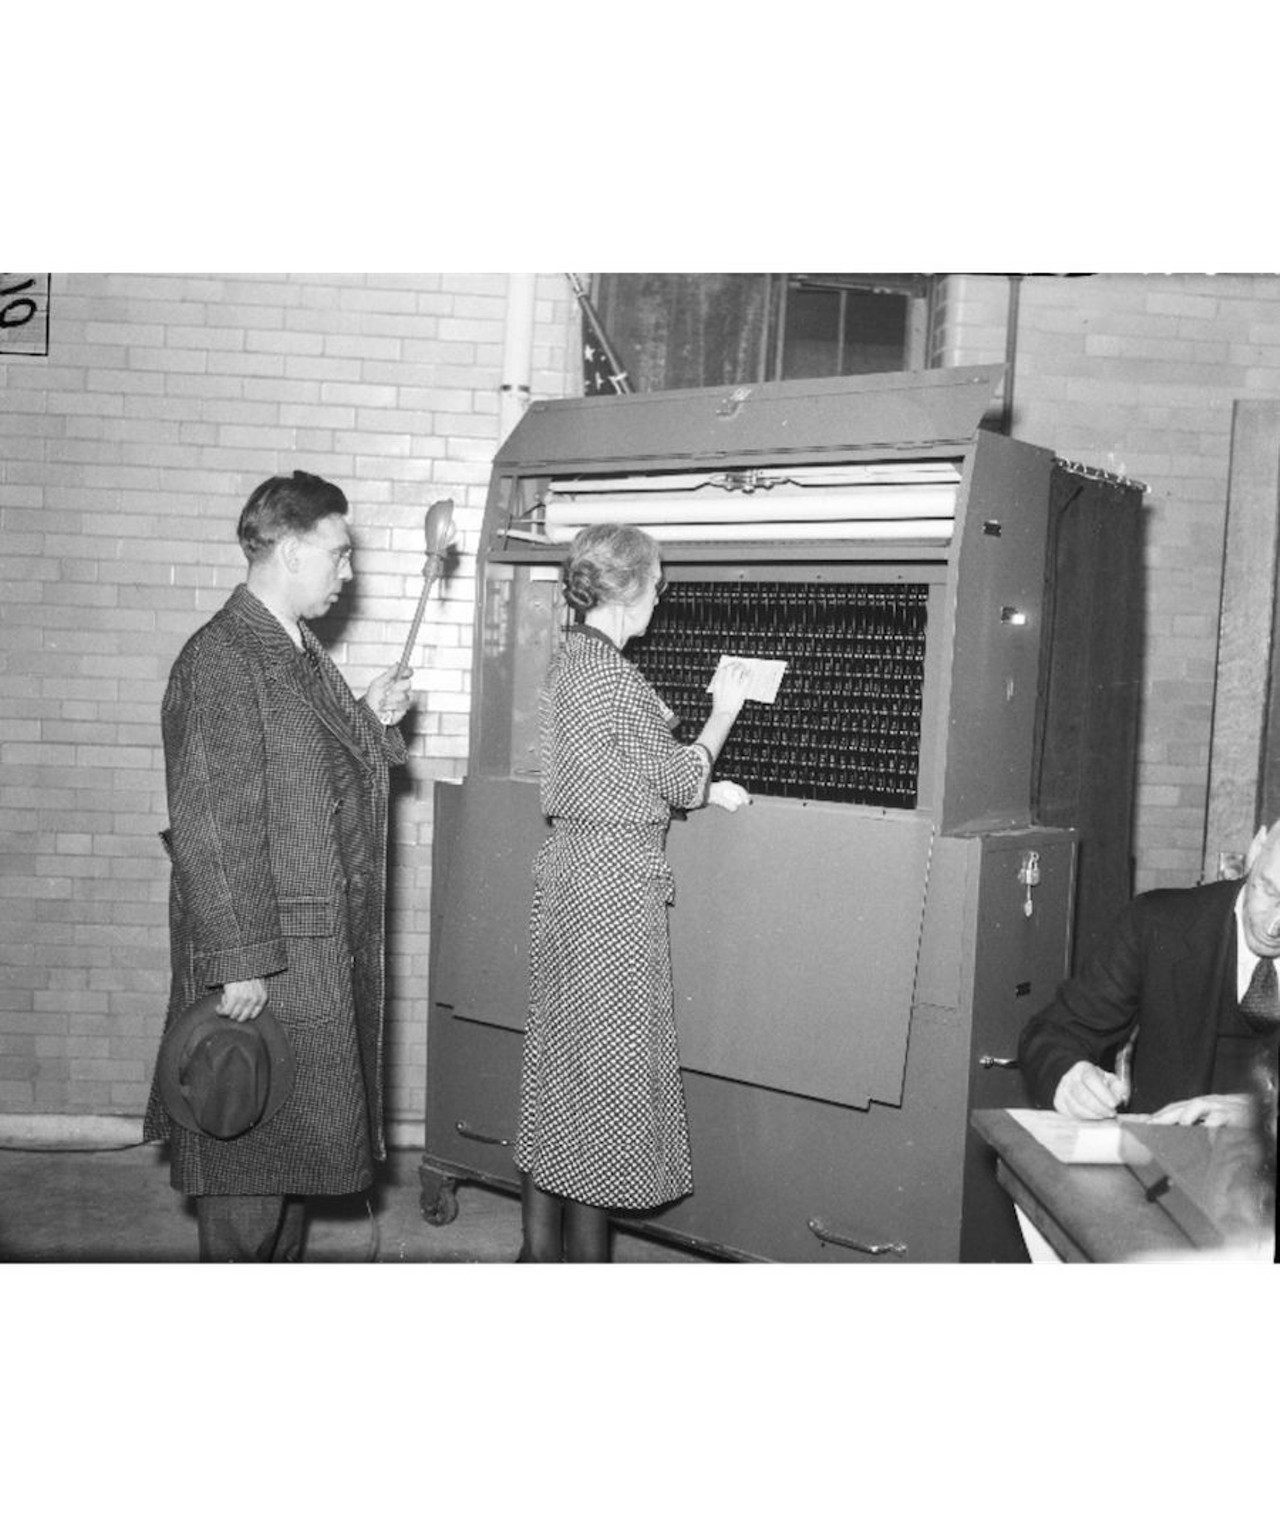 Voting machine.
All photos courtesy of Walter P. Reuther Library, Archives of Labor and Urban Affairs, Wayne State University